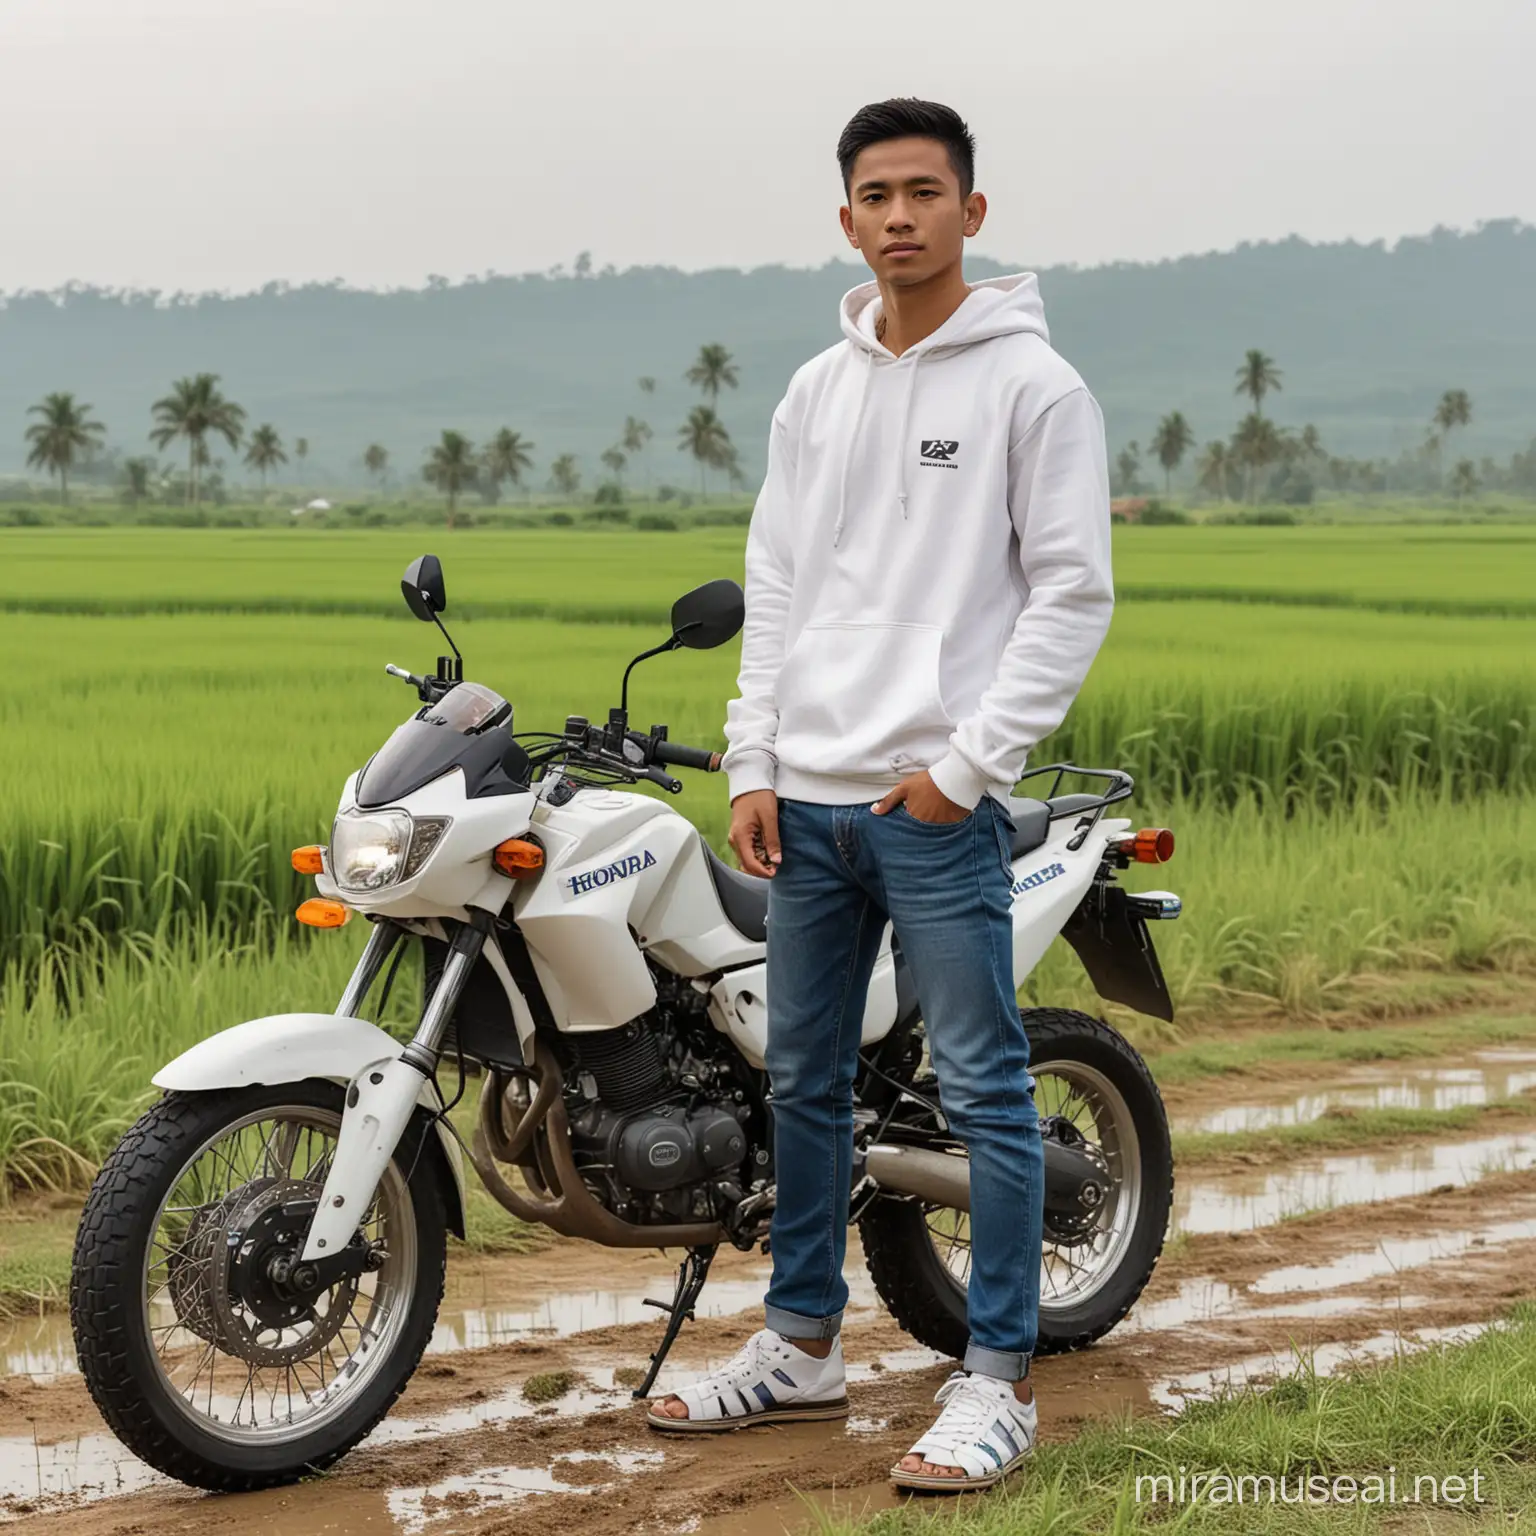 Indonesian Youth in White Hoodie Stands by Honda Sports Motorcycle in Rice Field Landscape